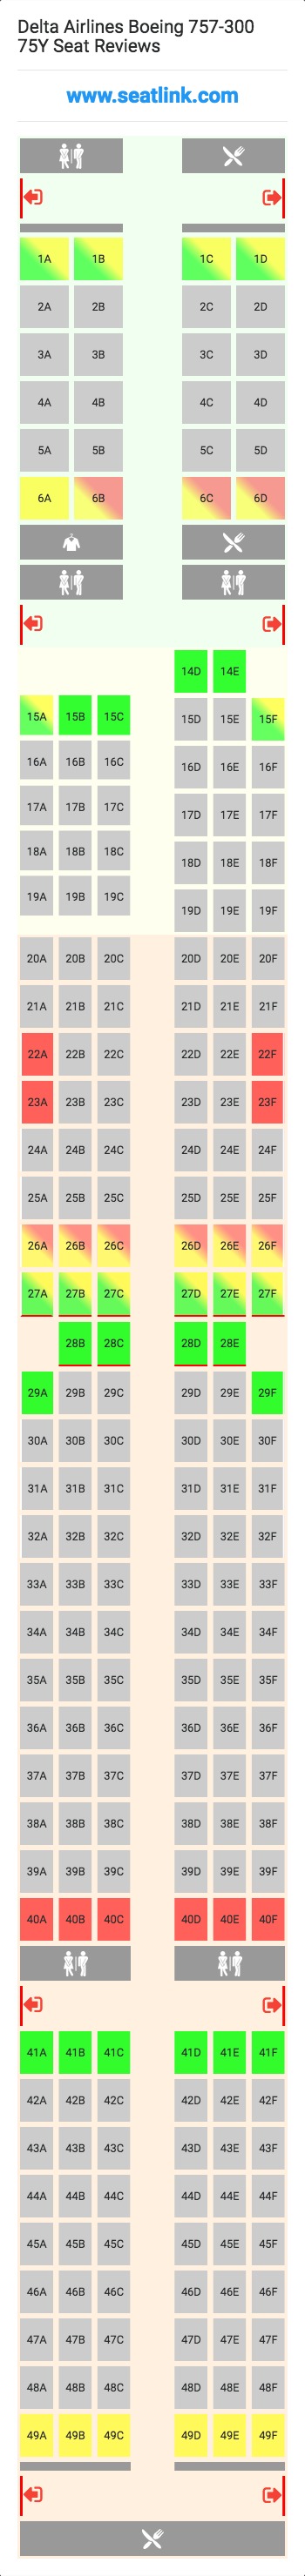 Delta Airlines Boeing 757 300 75y Seating Chart Updated